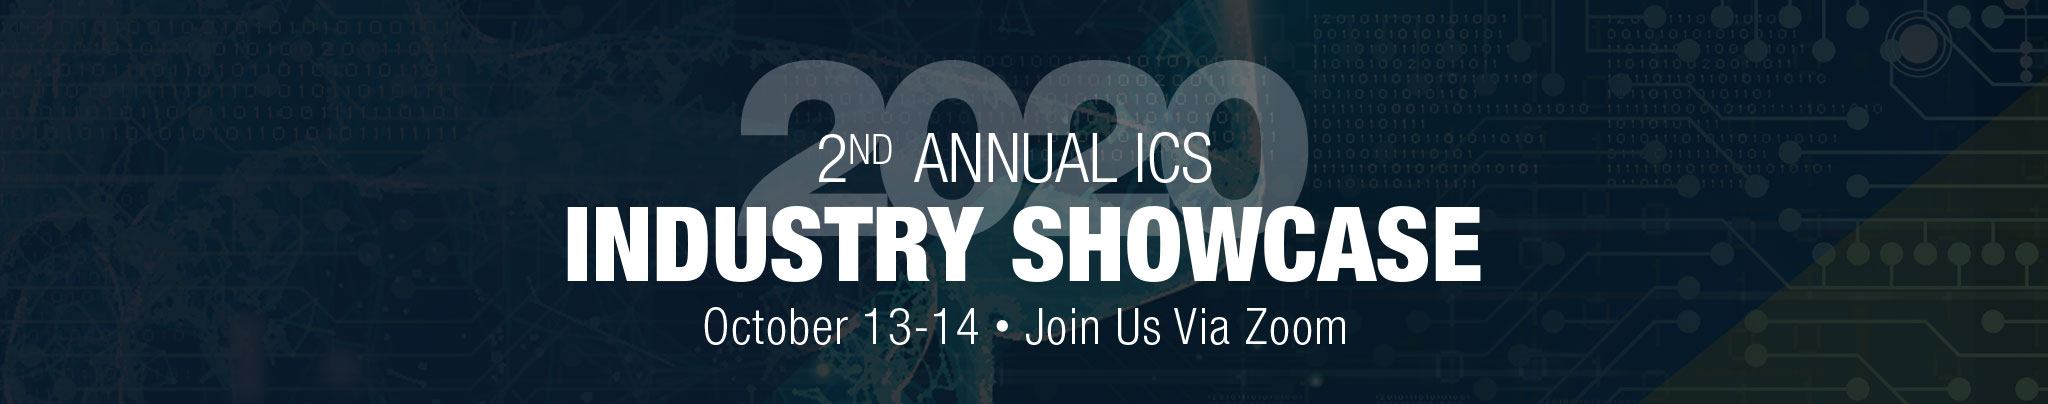 2nd Annual ICS Industry Showcase - October 13 & 14 - Join Is Via Zoom